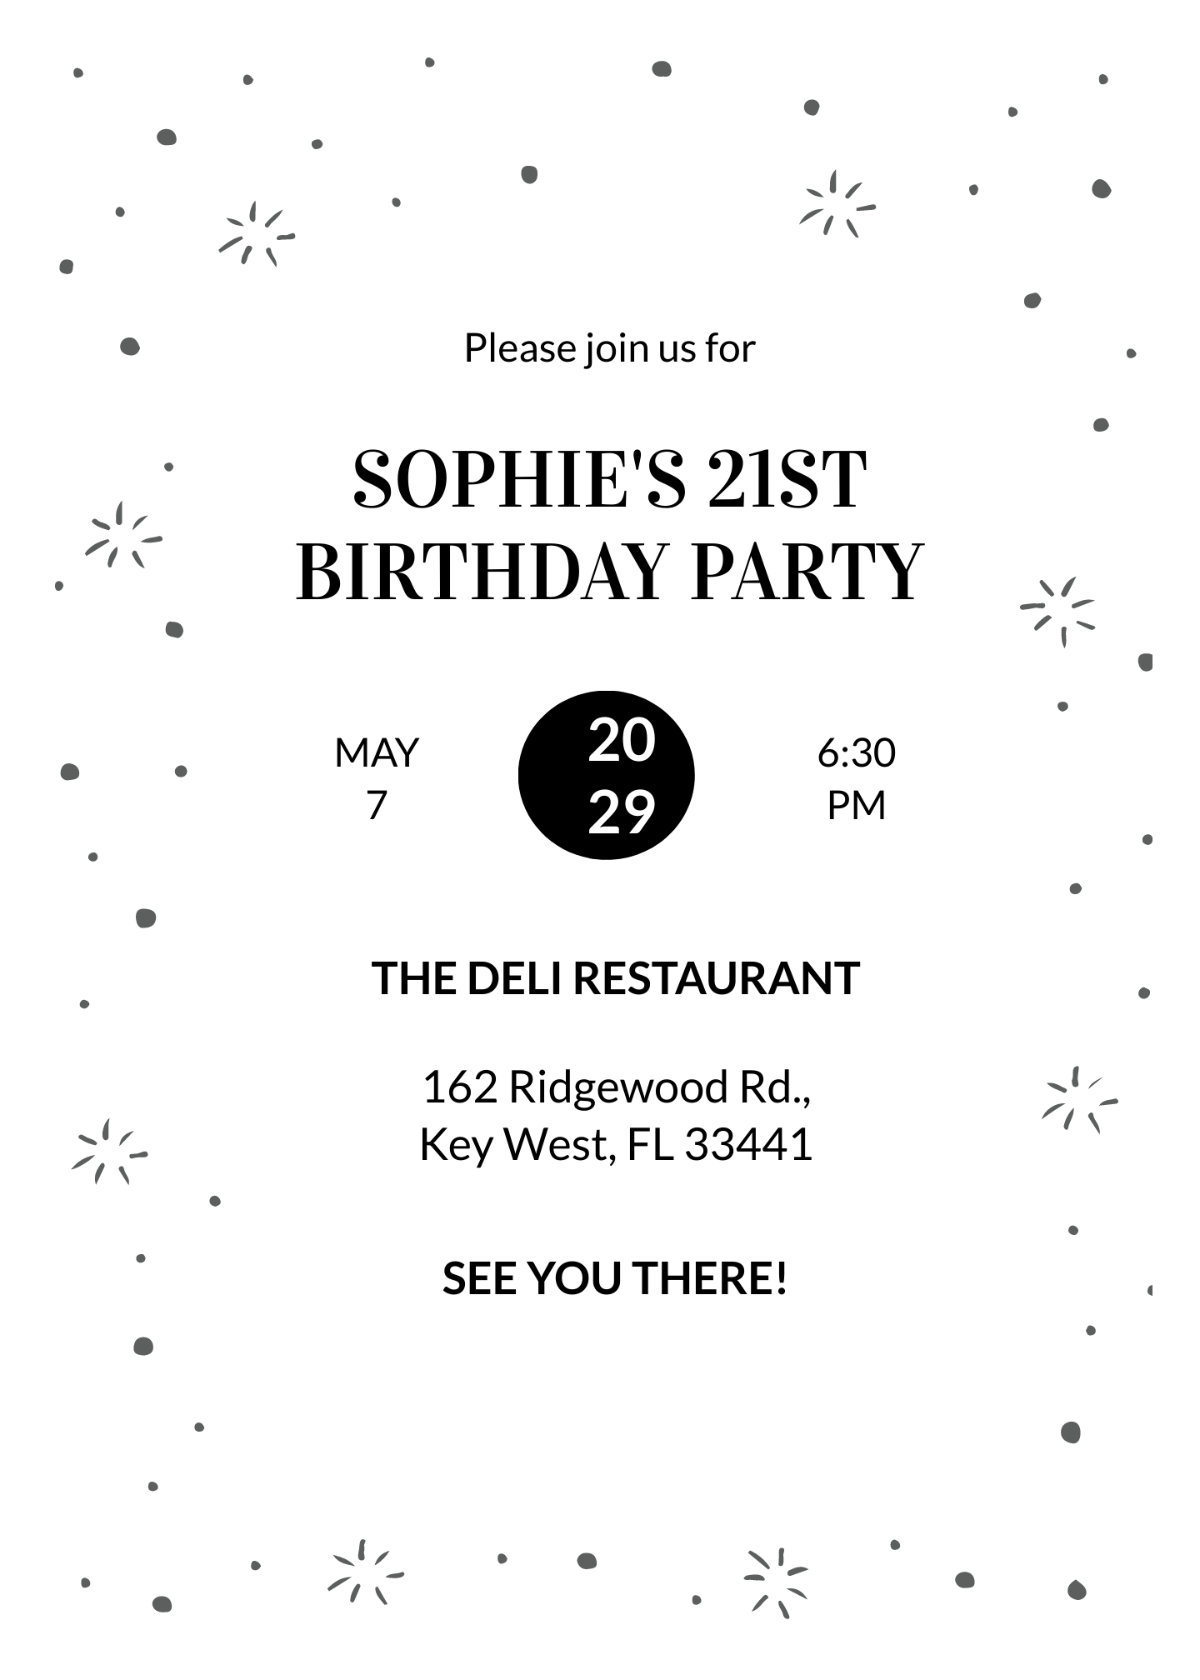 Black and White Birthday Party Invitation Template